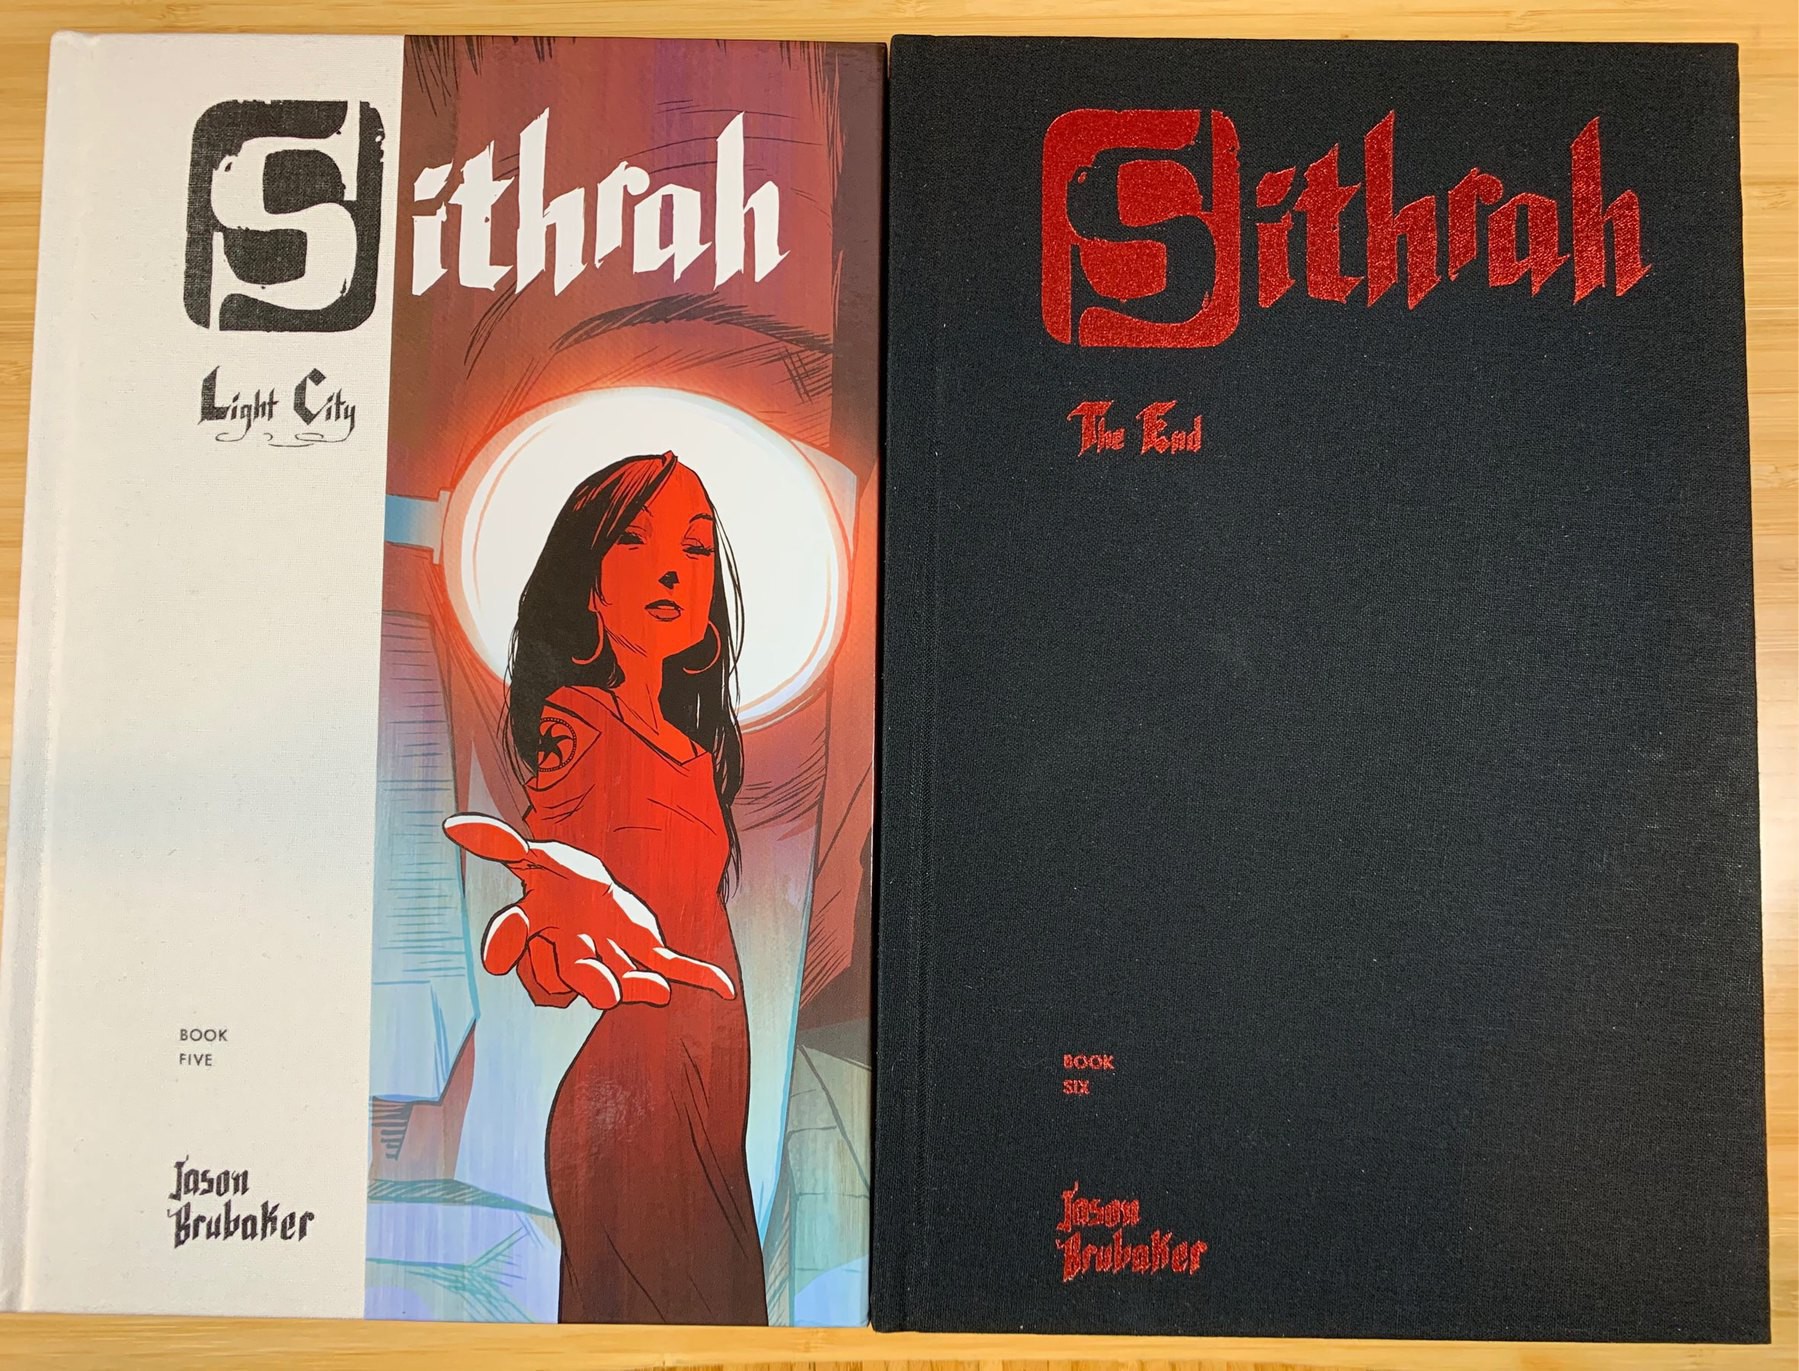 Covers for Sithrah books 5 and 6